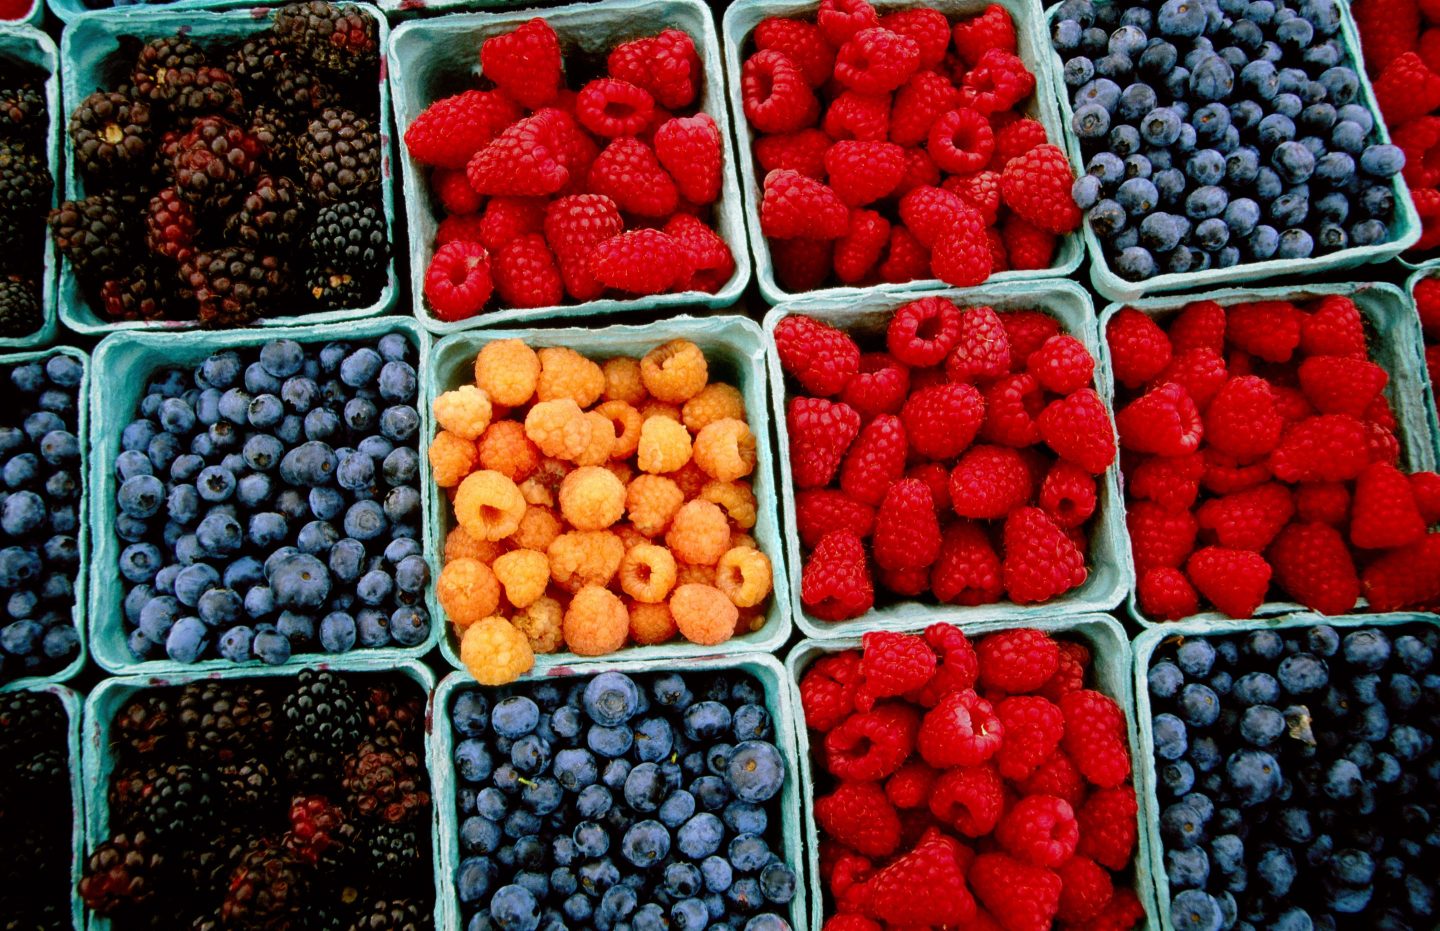 Raspberries, blueberries, and blackberries for sale at a farmers' market